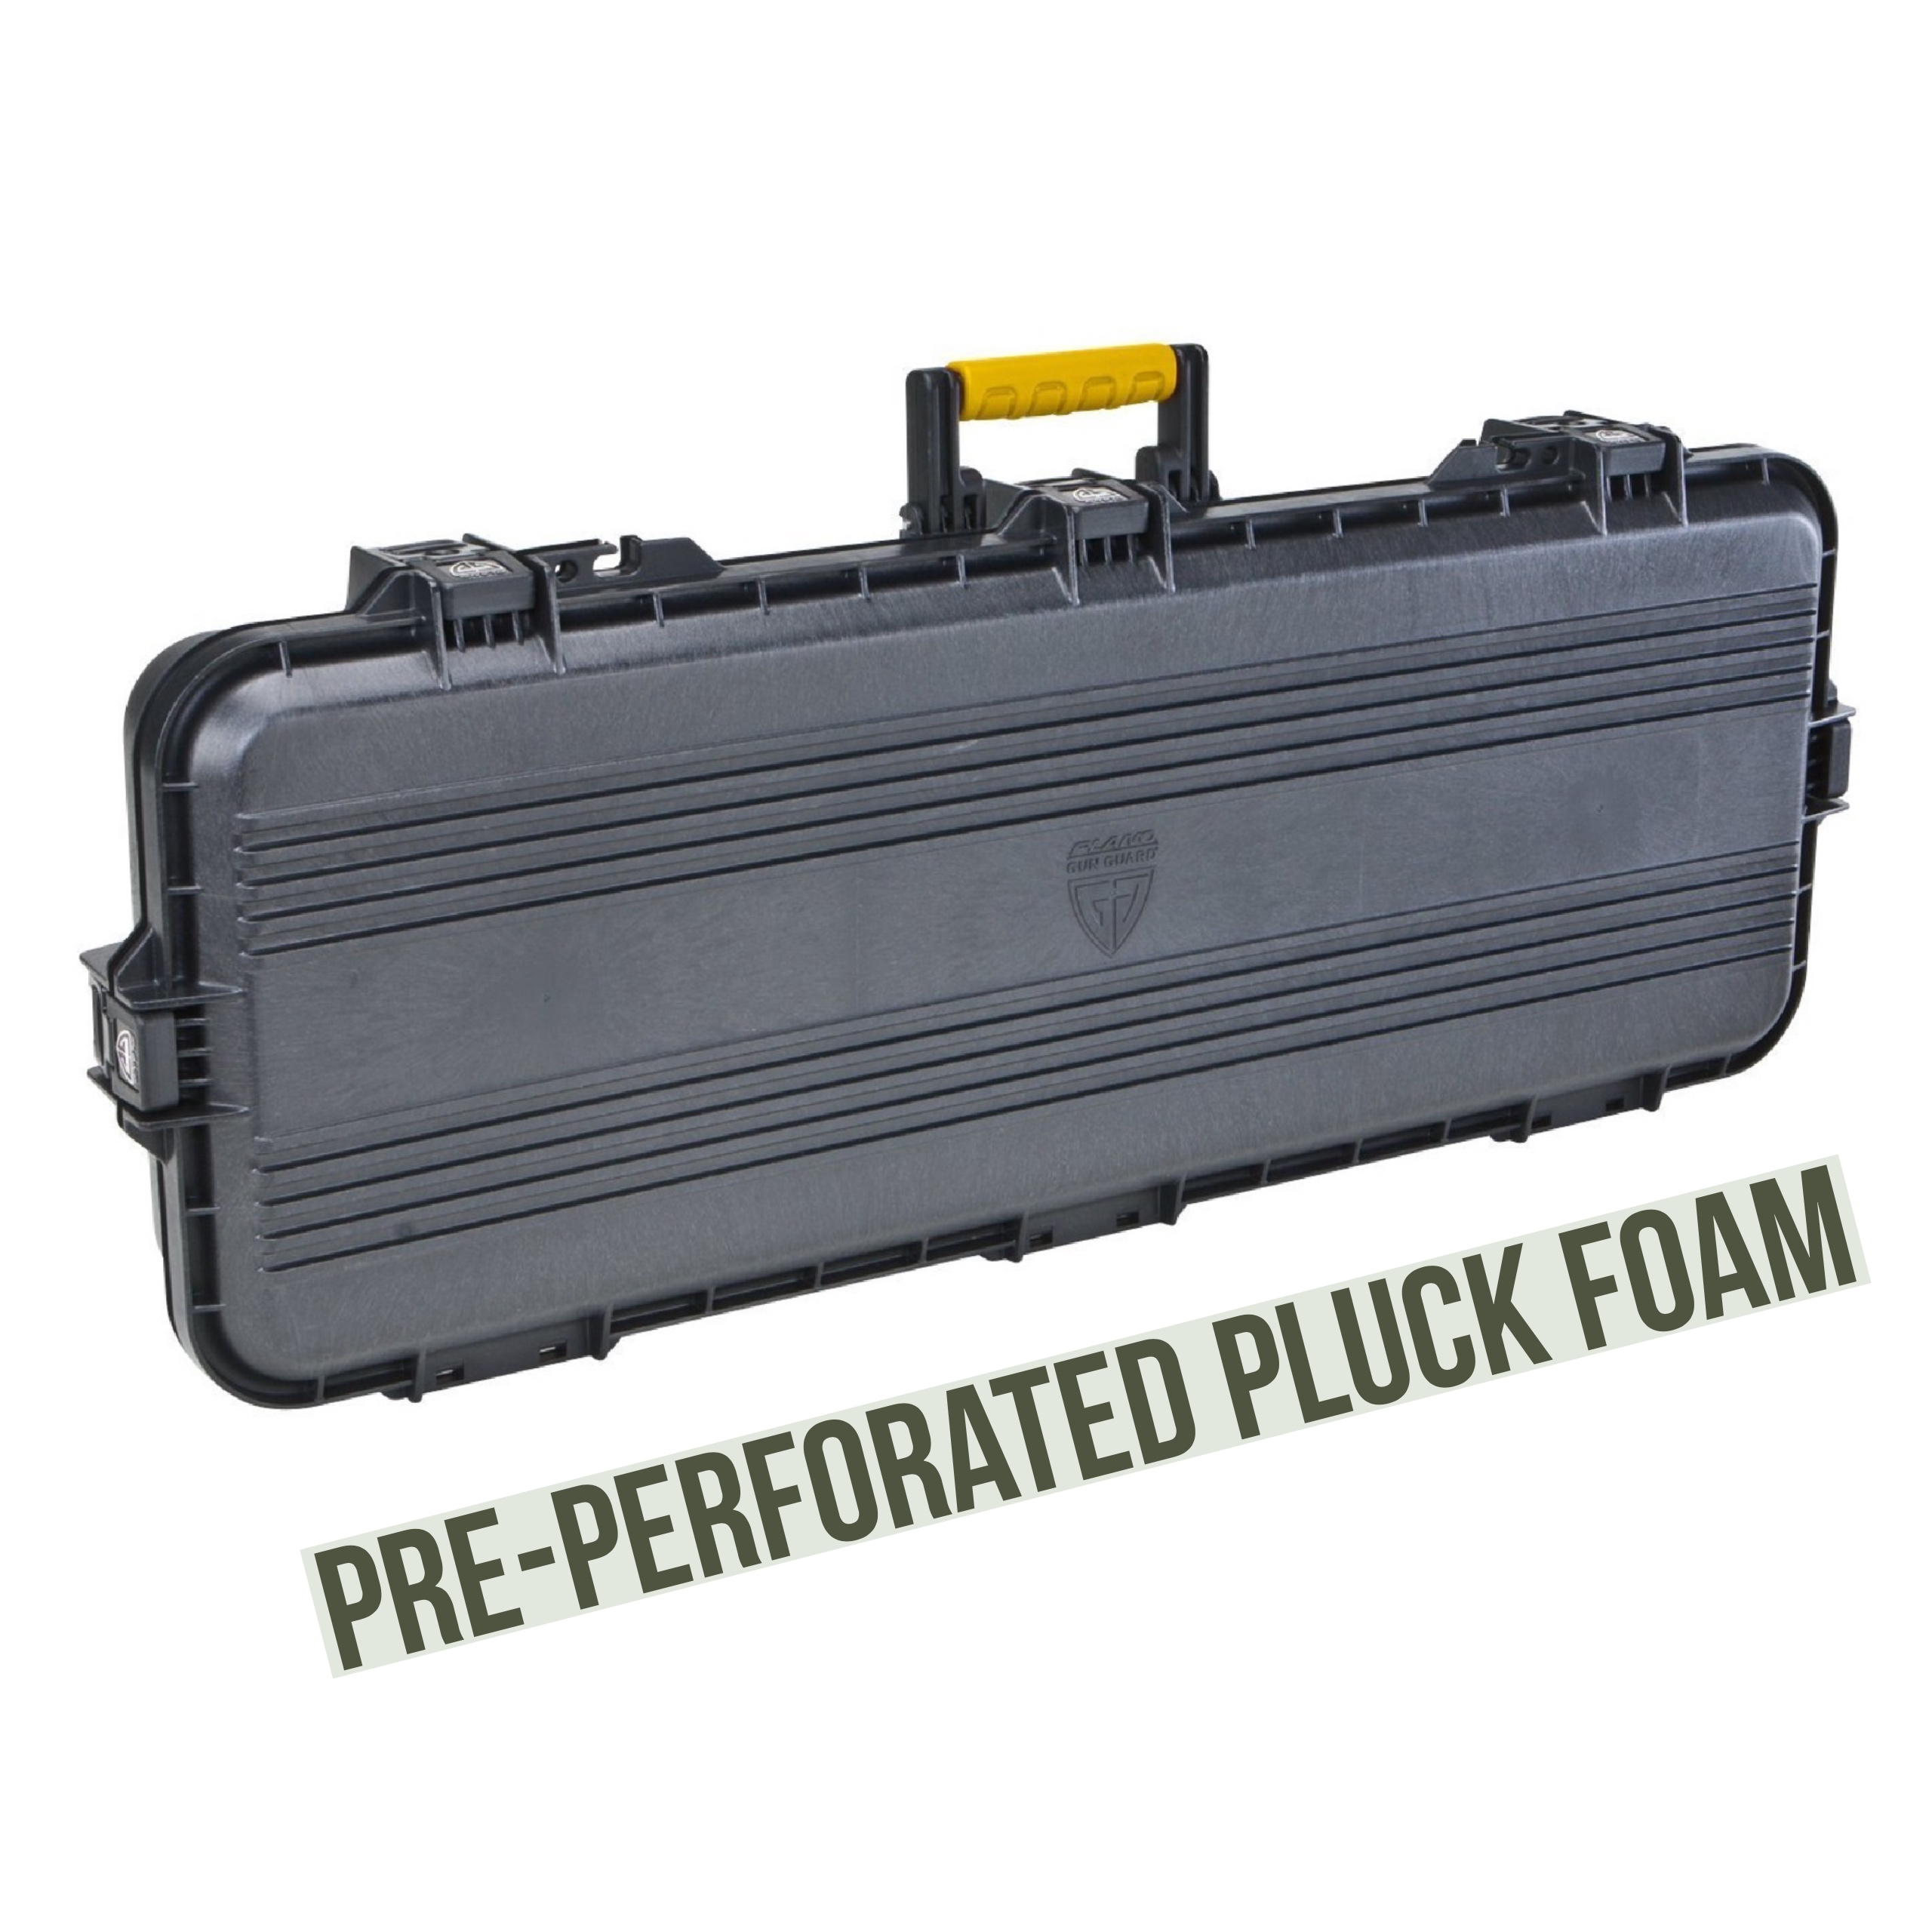 Plano All Weather Single Rifle Case, Black - image 4 of 9